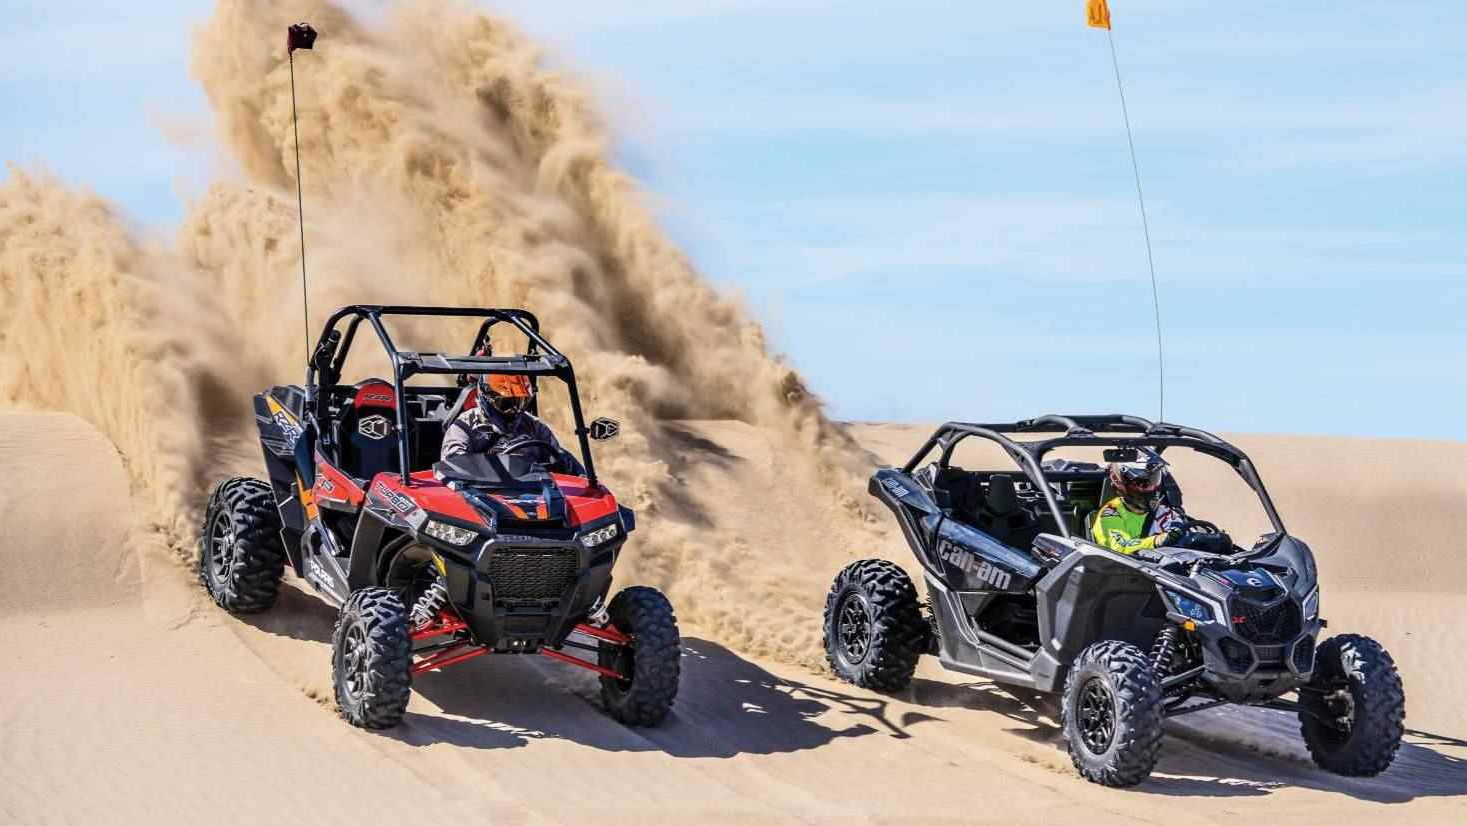 Dune Buggy passenger experience 1000cc for 30 minutes